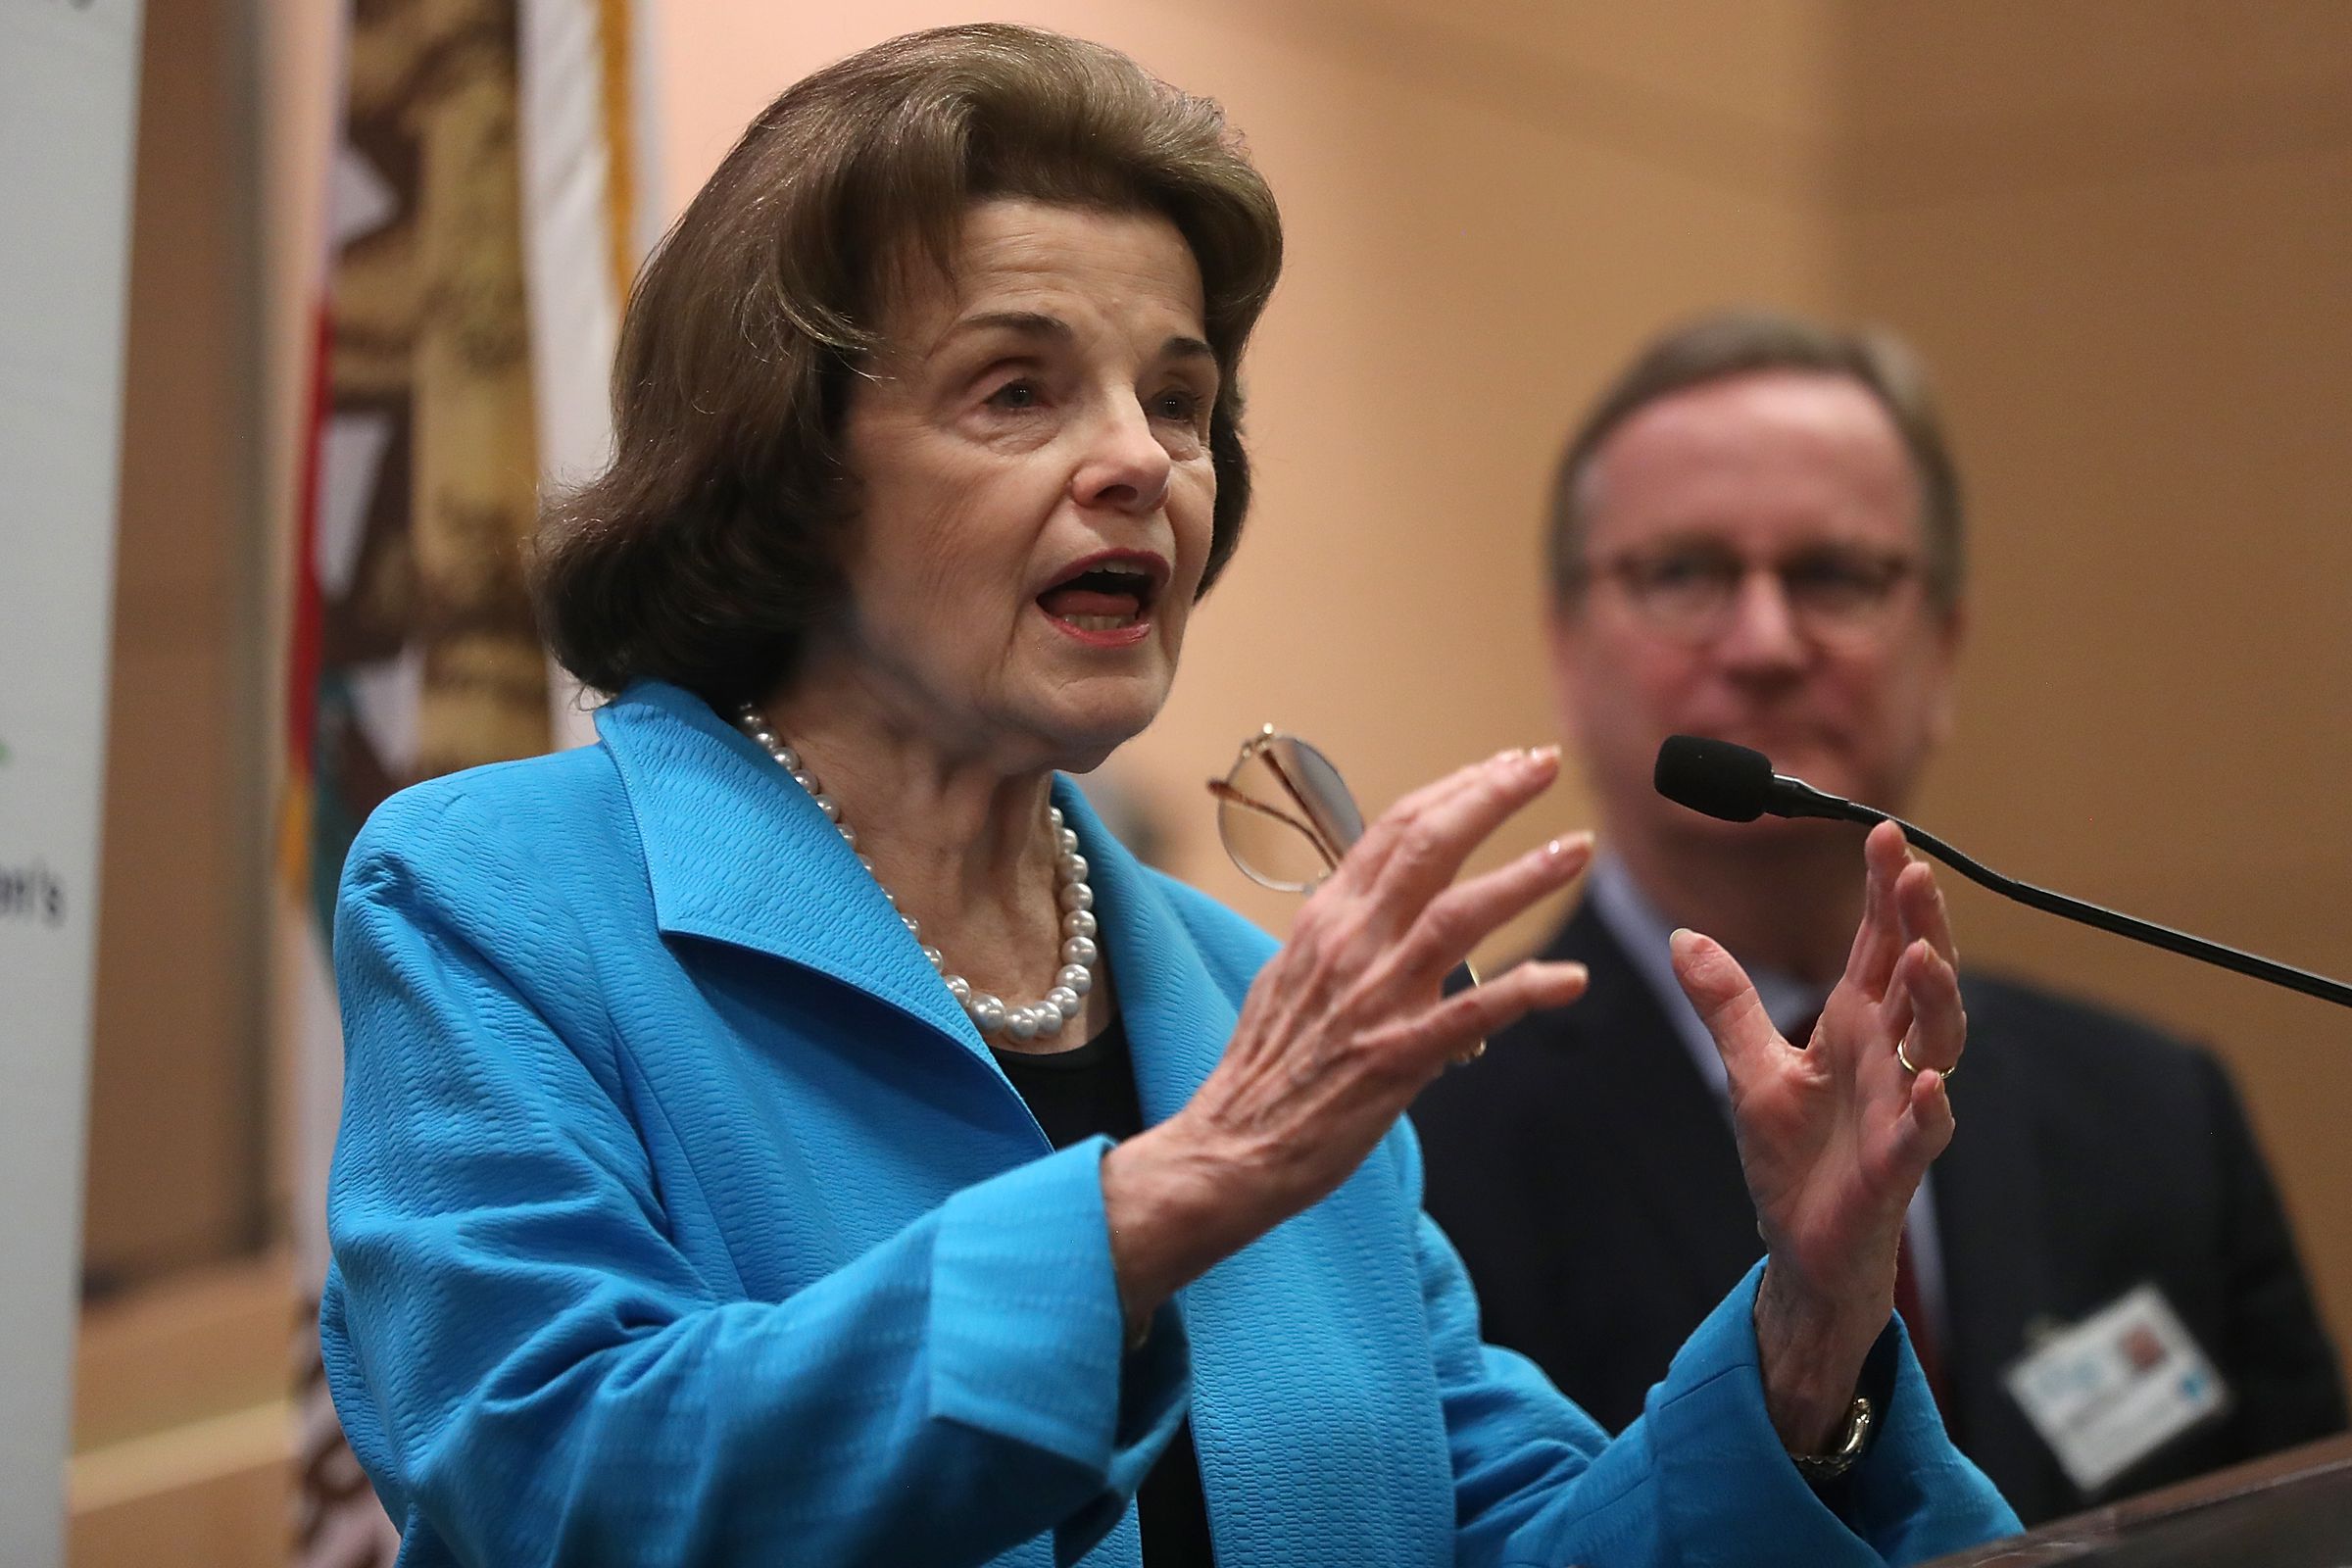 Dianne Feinstein Holds Press Conference On Impacts Of Medicaid Cuts On Kids